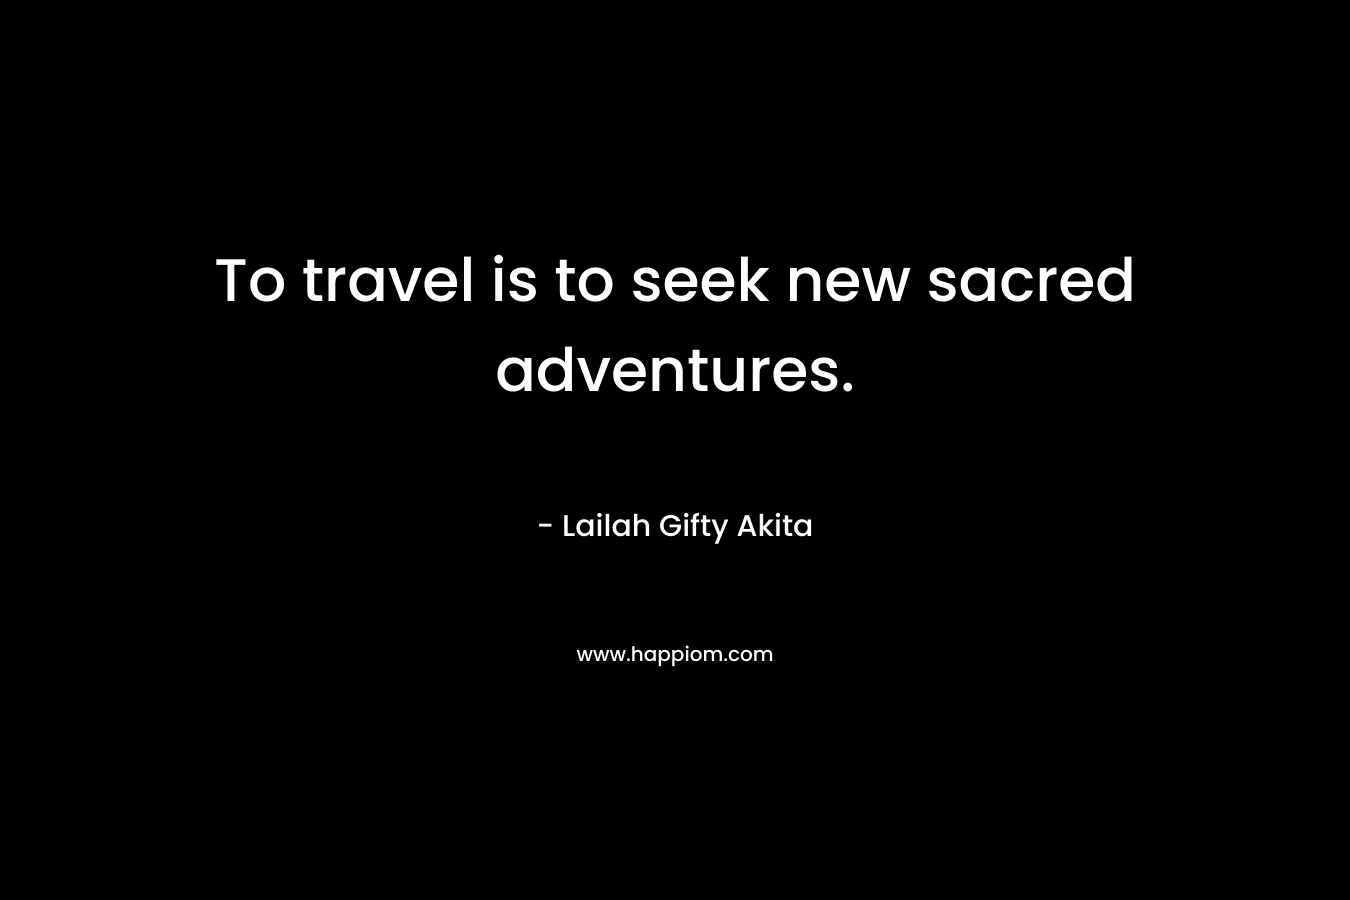 To travel is to seek new sacred adventures.